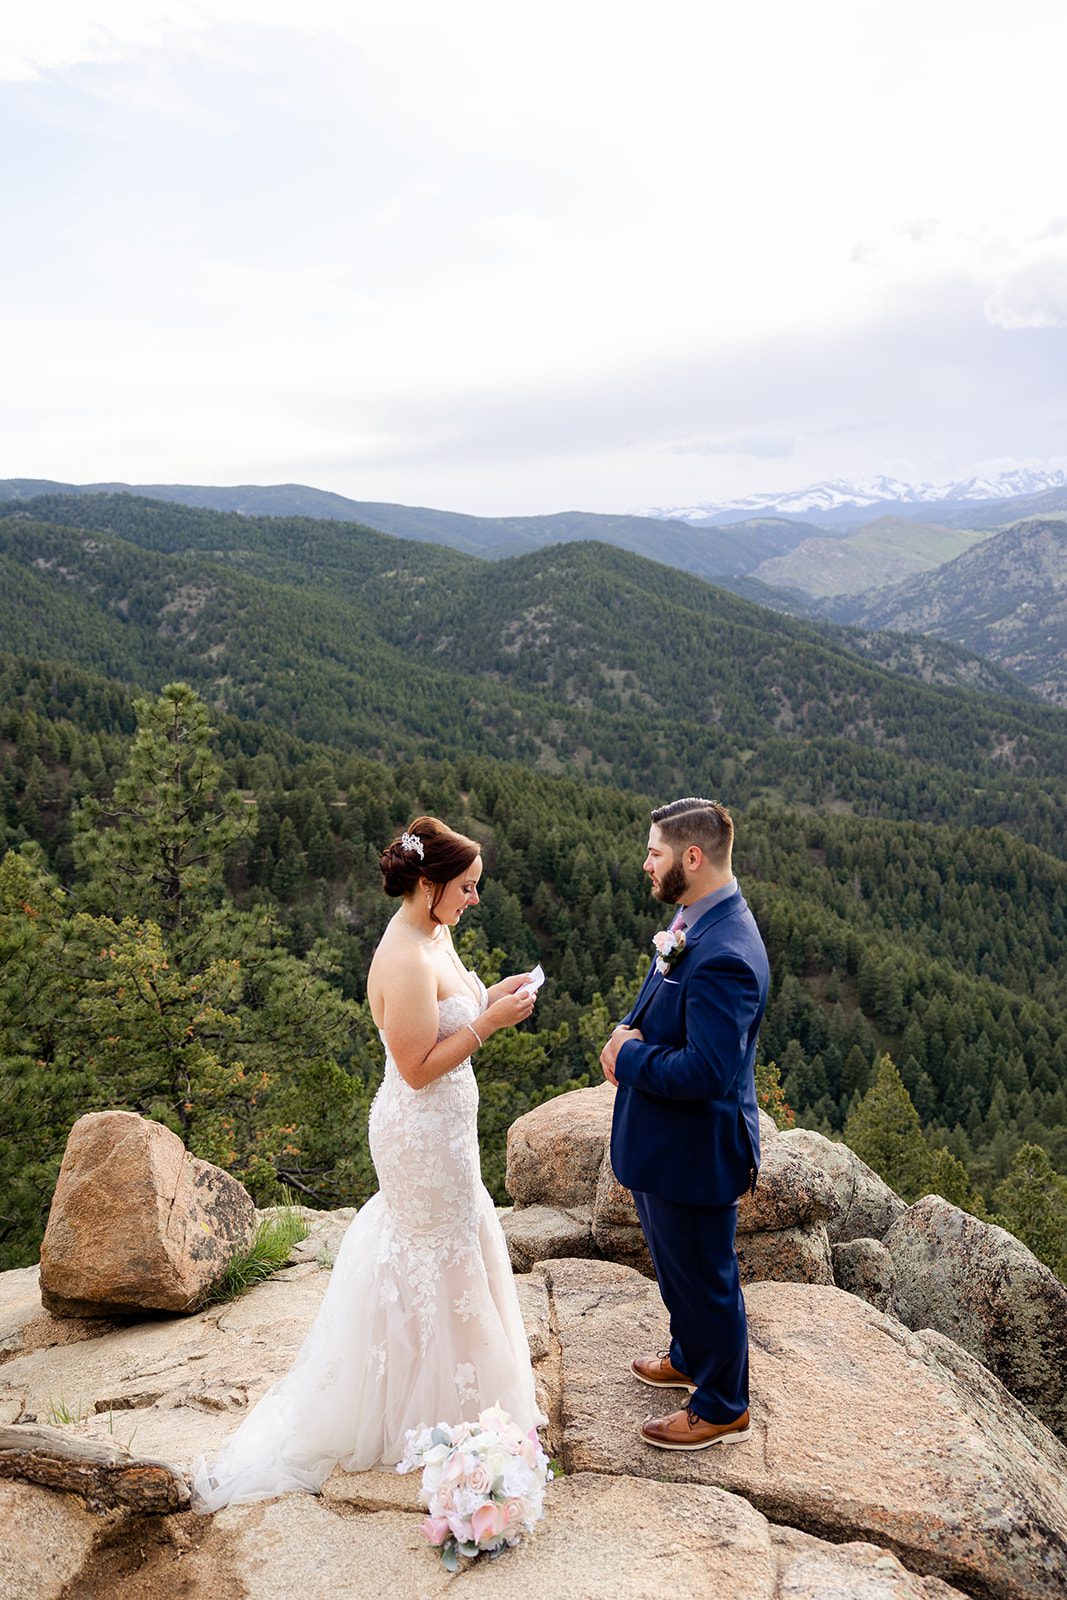 Bride reading her vows durig their Boulder ceremony elopement with videography.